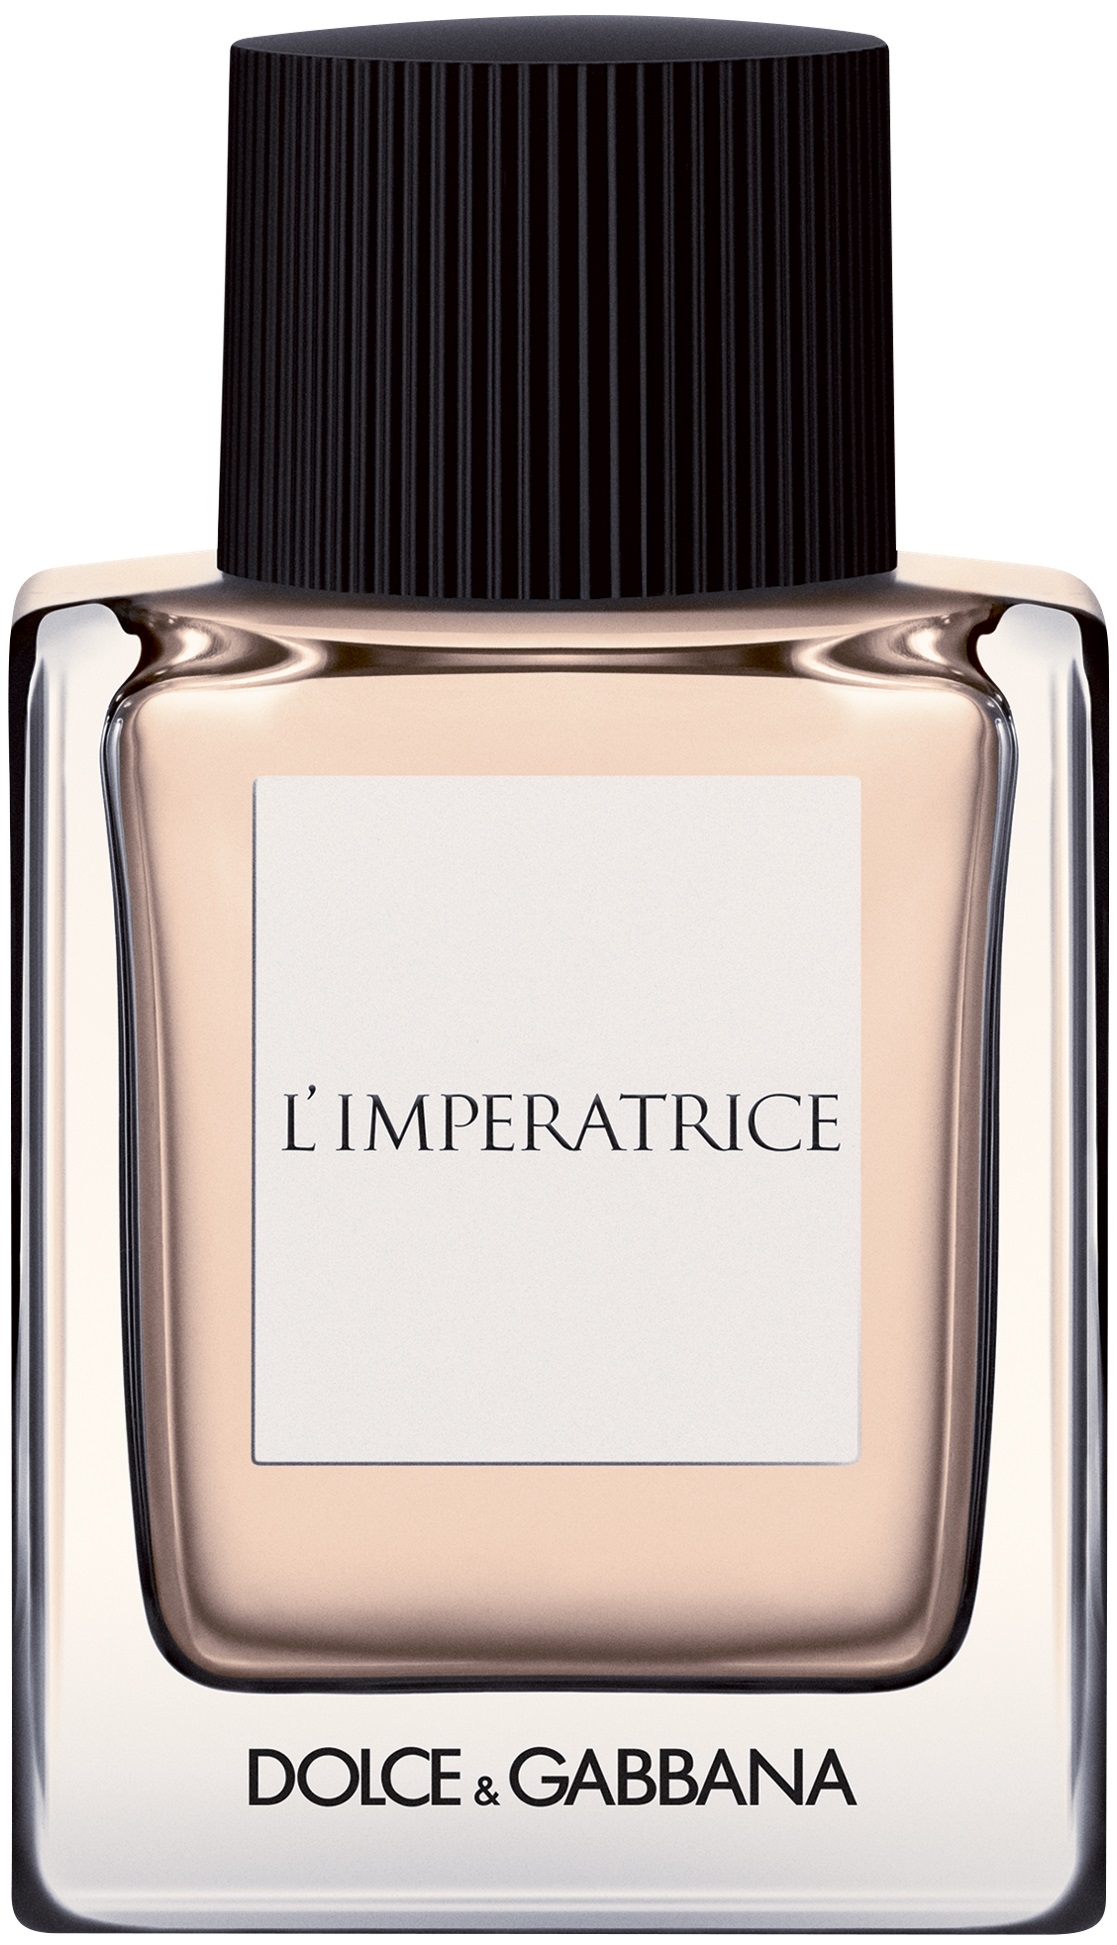 dolce gabbana limperatrice